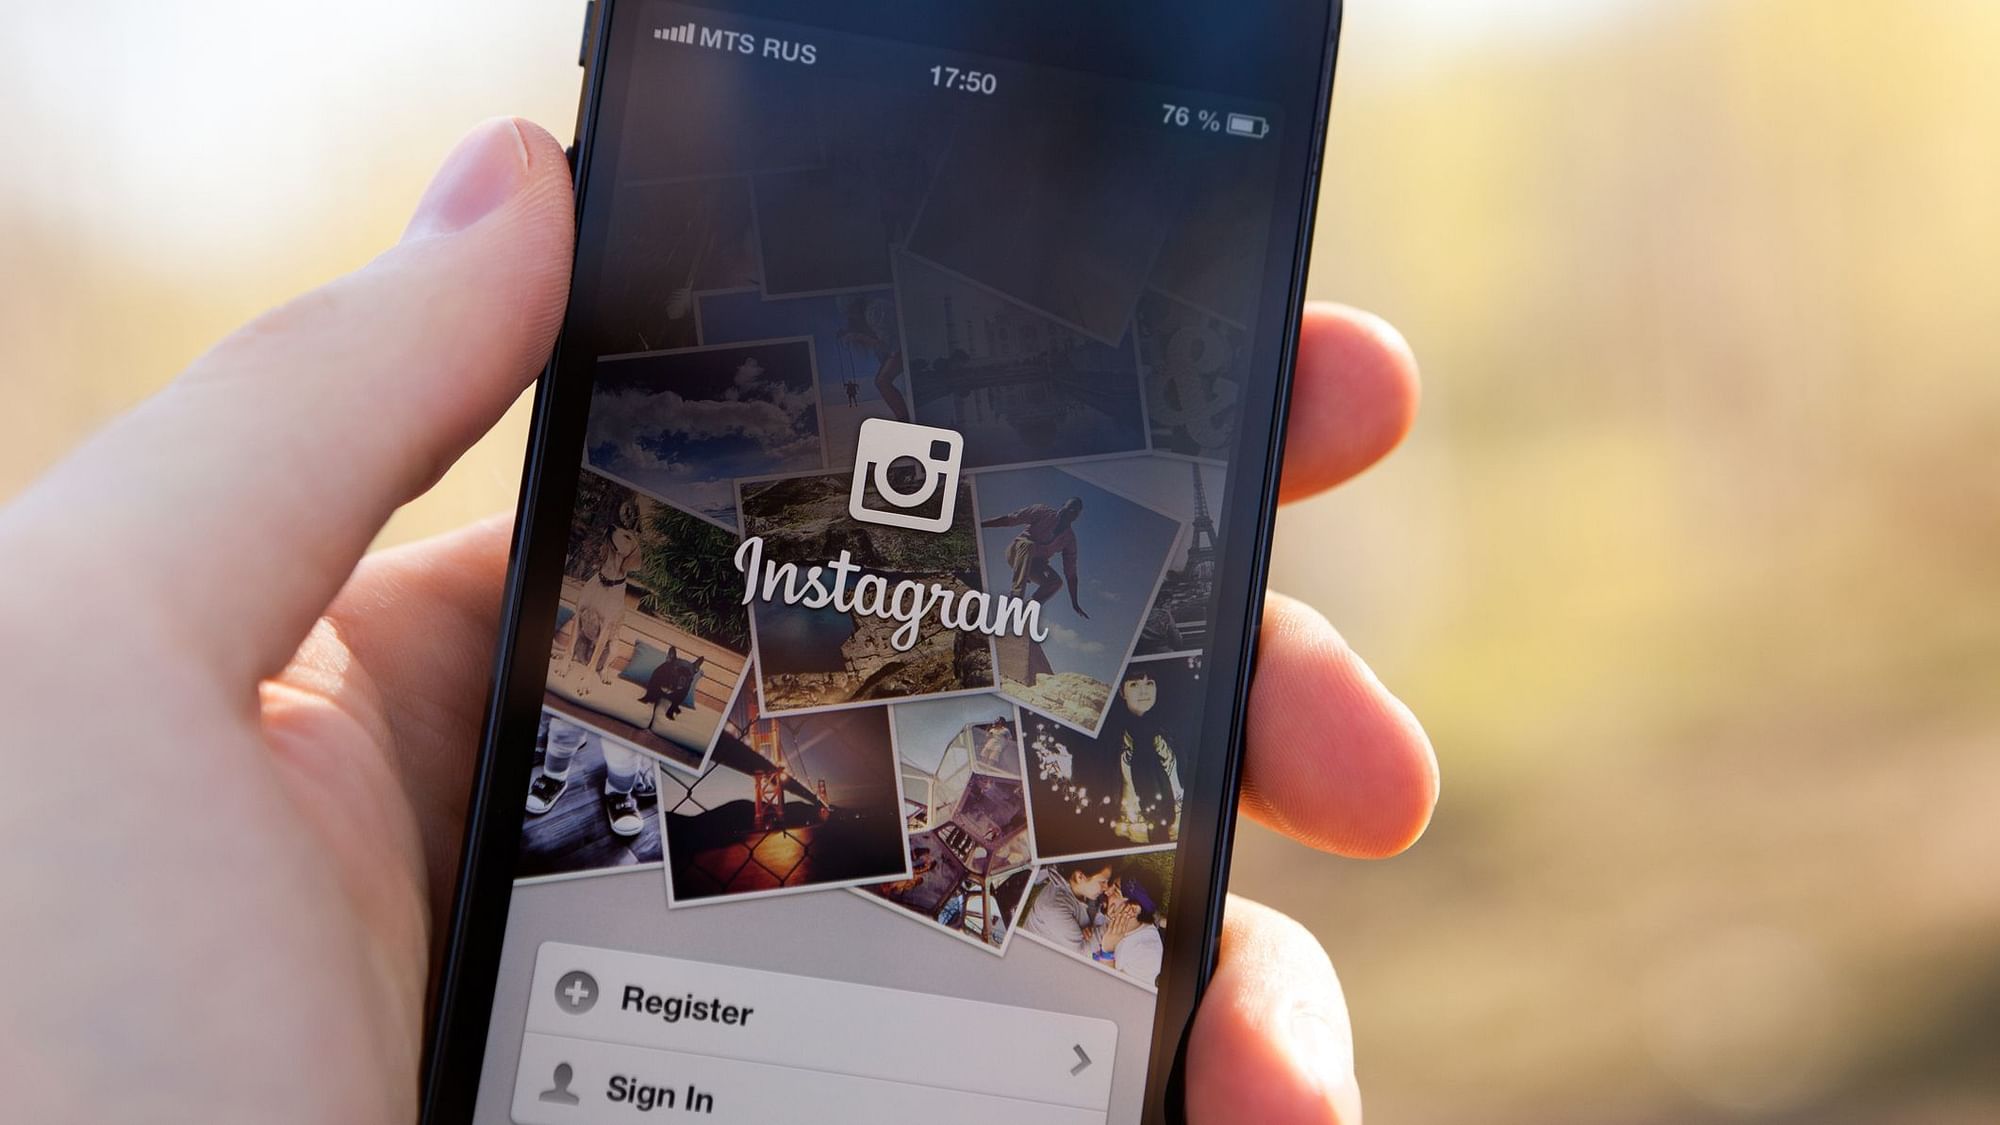 Instagram has released a feature for the web version where you can send direct messages.